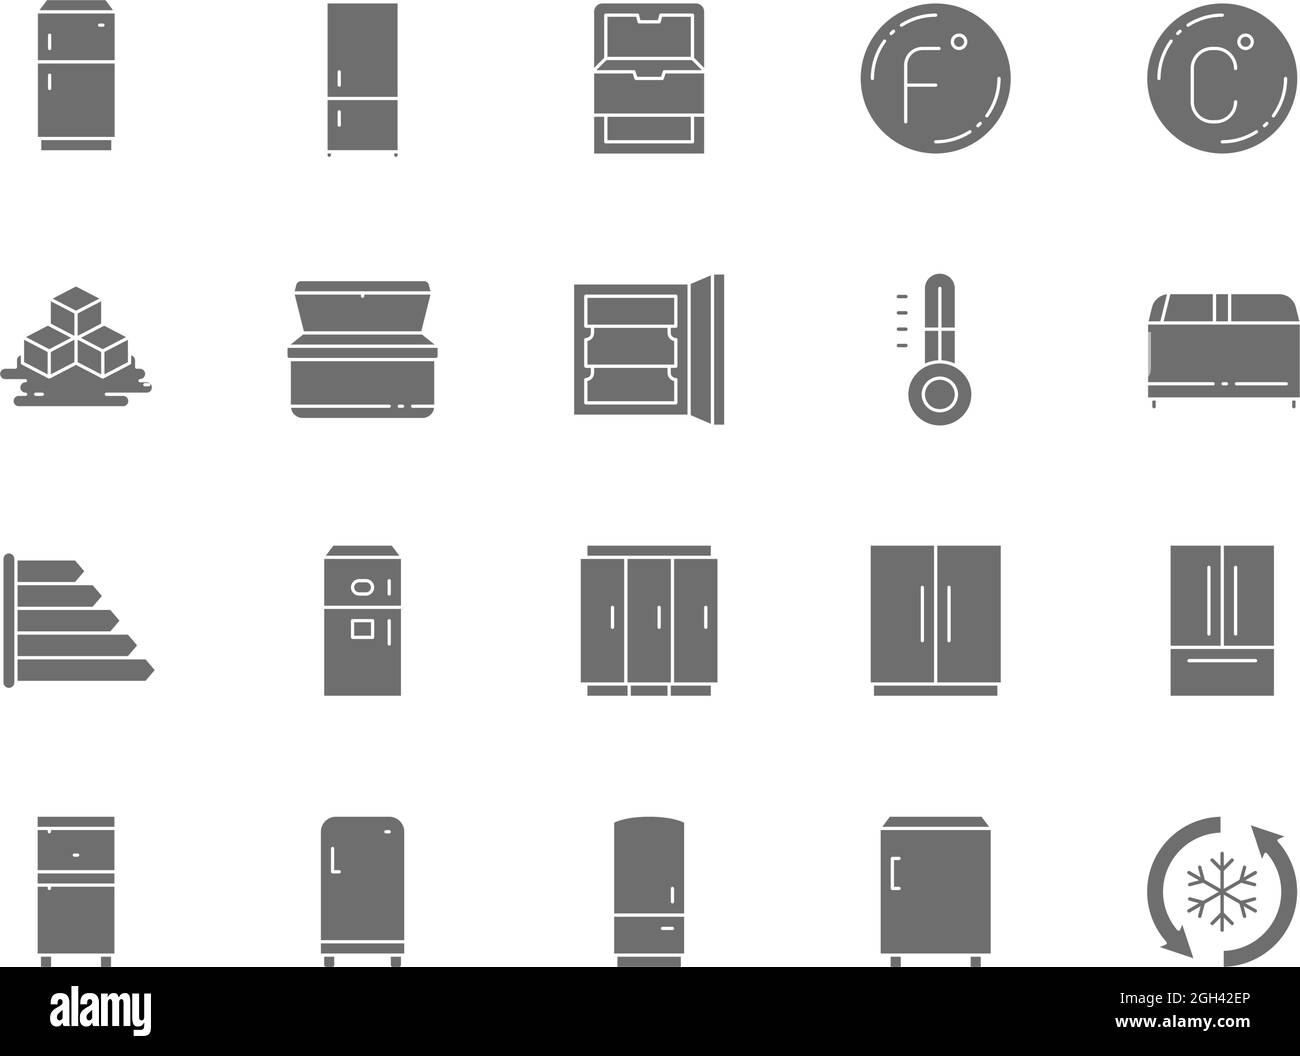 Set of Fridge Grey Icons. Thermometer, Freezer, Refrigerator, Ice Cubes and more Stock Vector